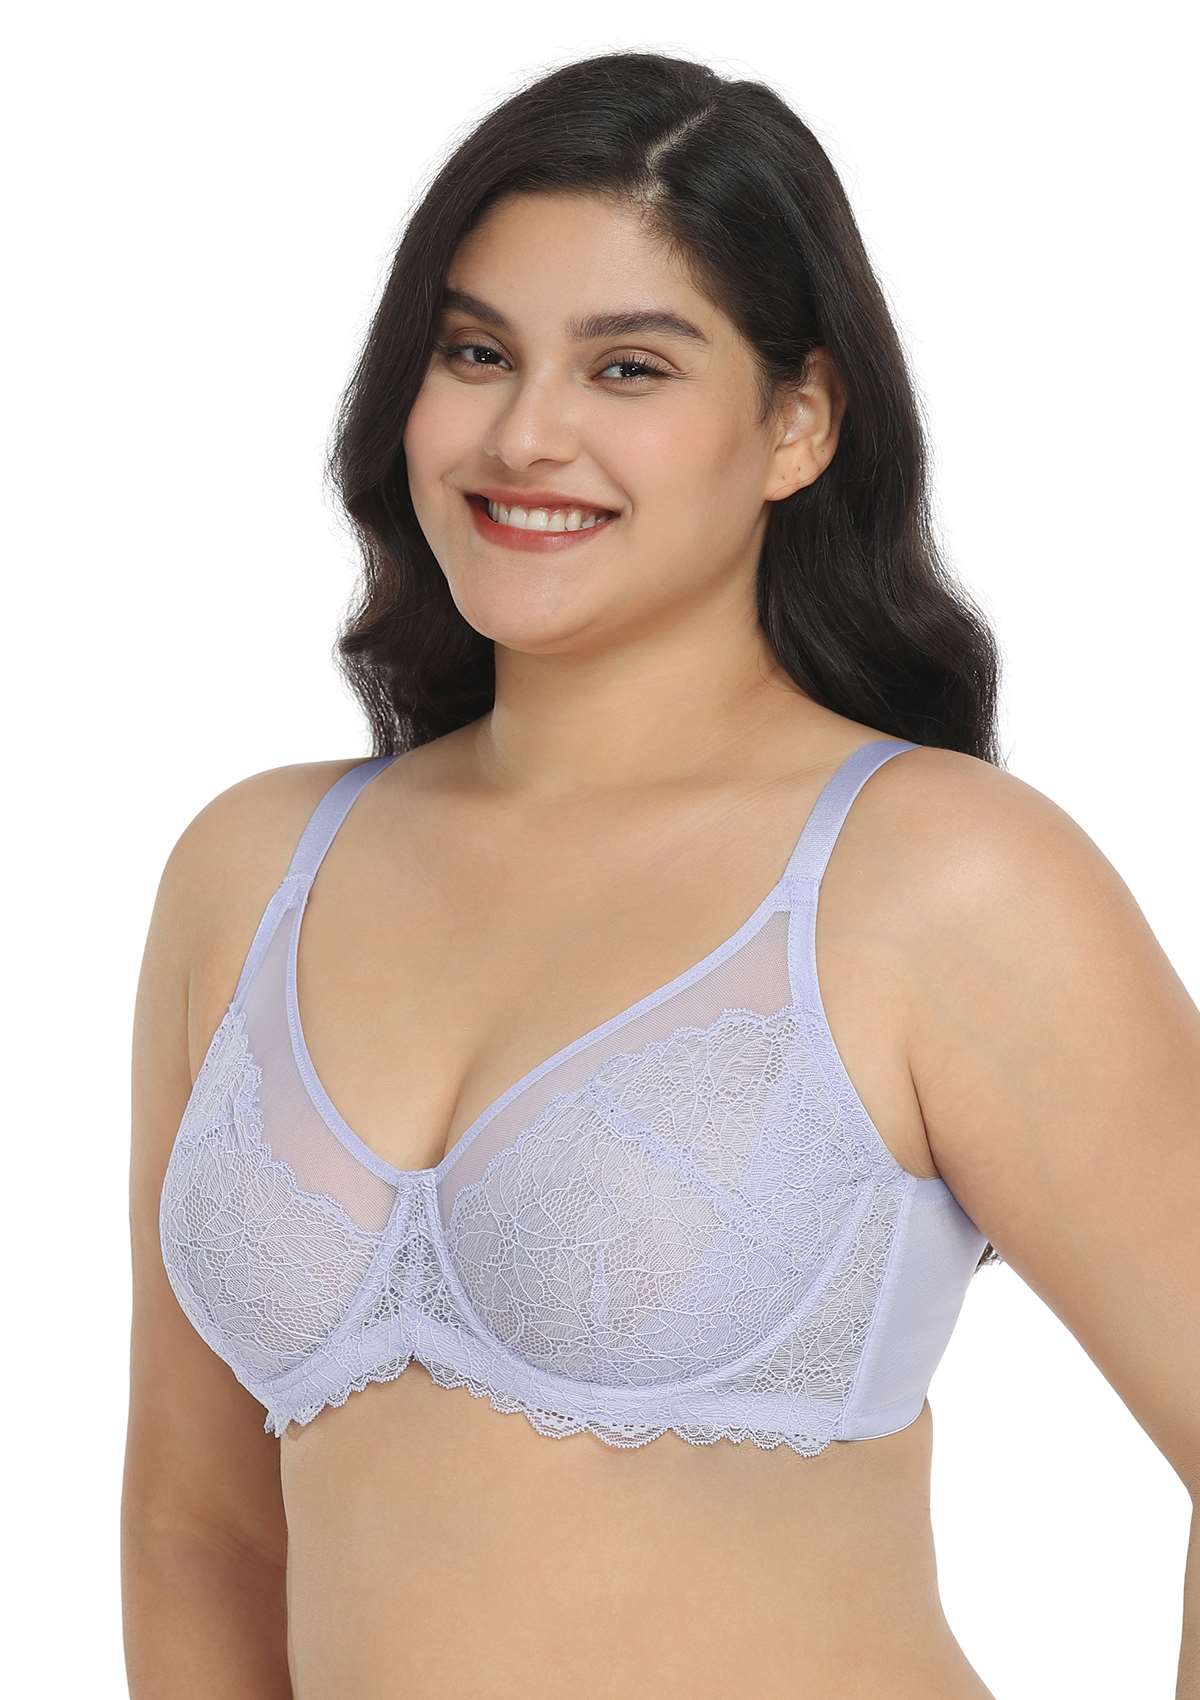 HSIA Wisteria Bra For Lift And Support - Full Coverage Minimizer Bra - Light Pink / 42 / D